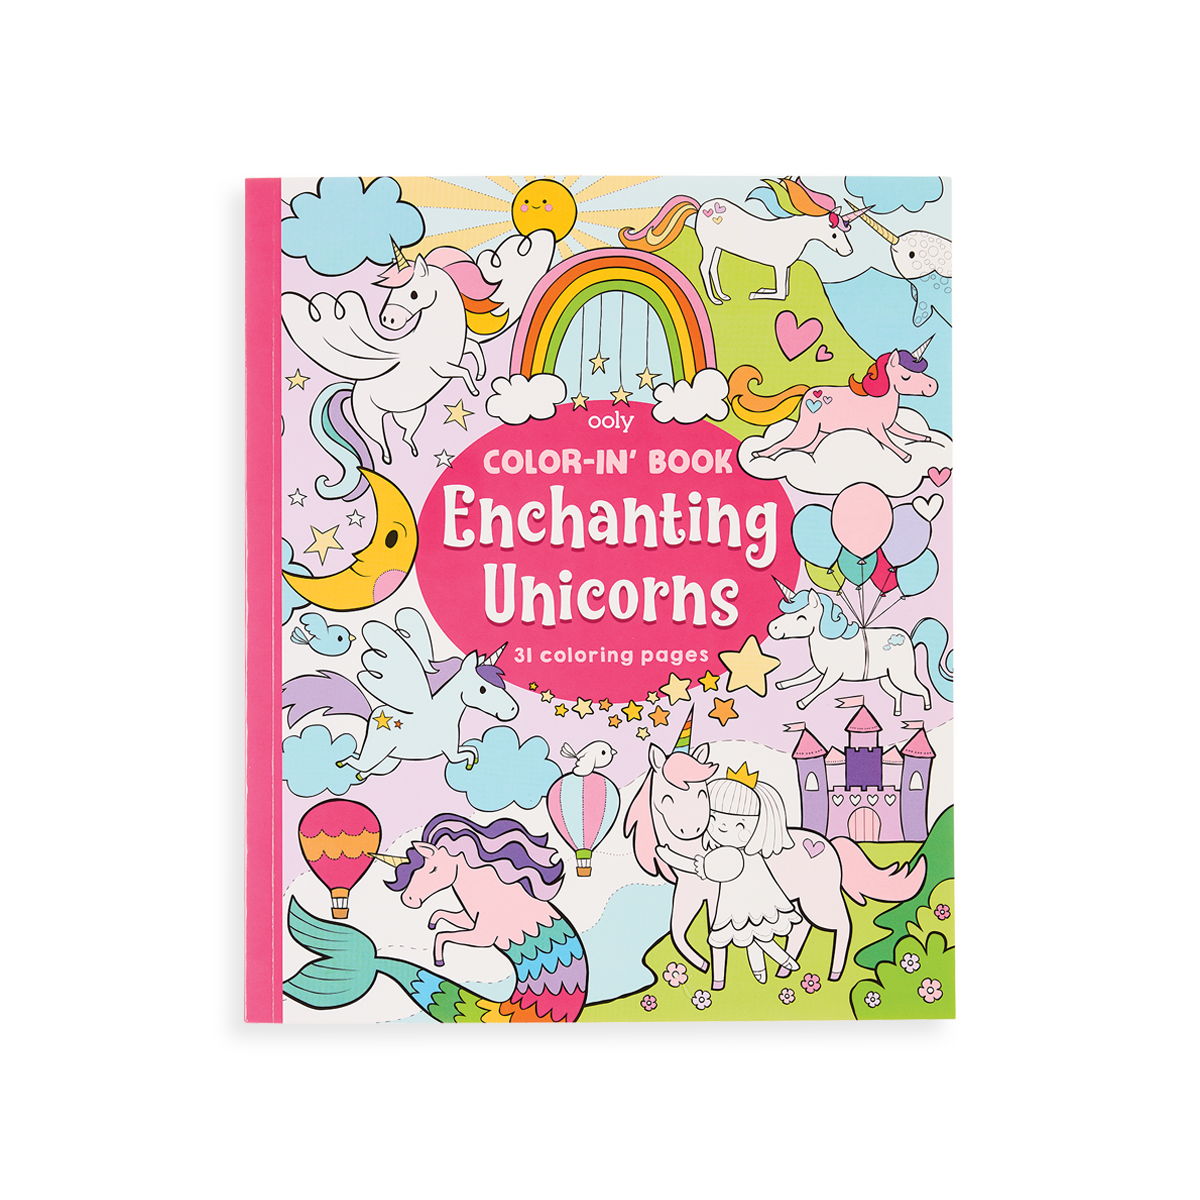  Afro Unicorn Activity and Coloring Book Bundle - Unicorn  Coloring Set for Black Girls Includes Afro Unicorn Coloring Book and Play  Pack with Tattoos, Stickers, More (Coloring Books for Black Kids) 